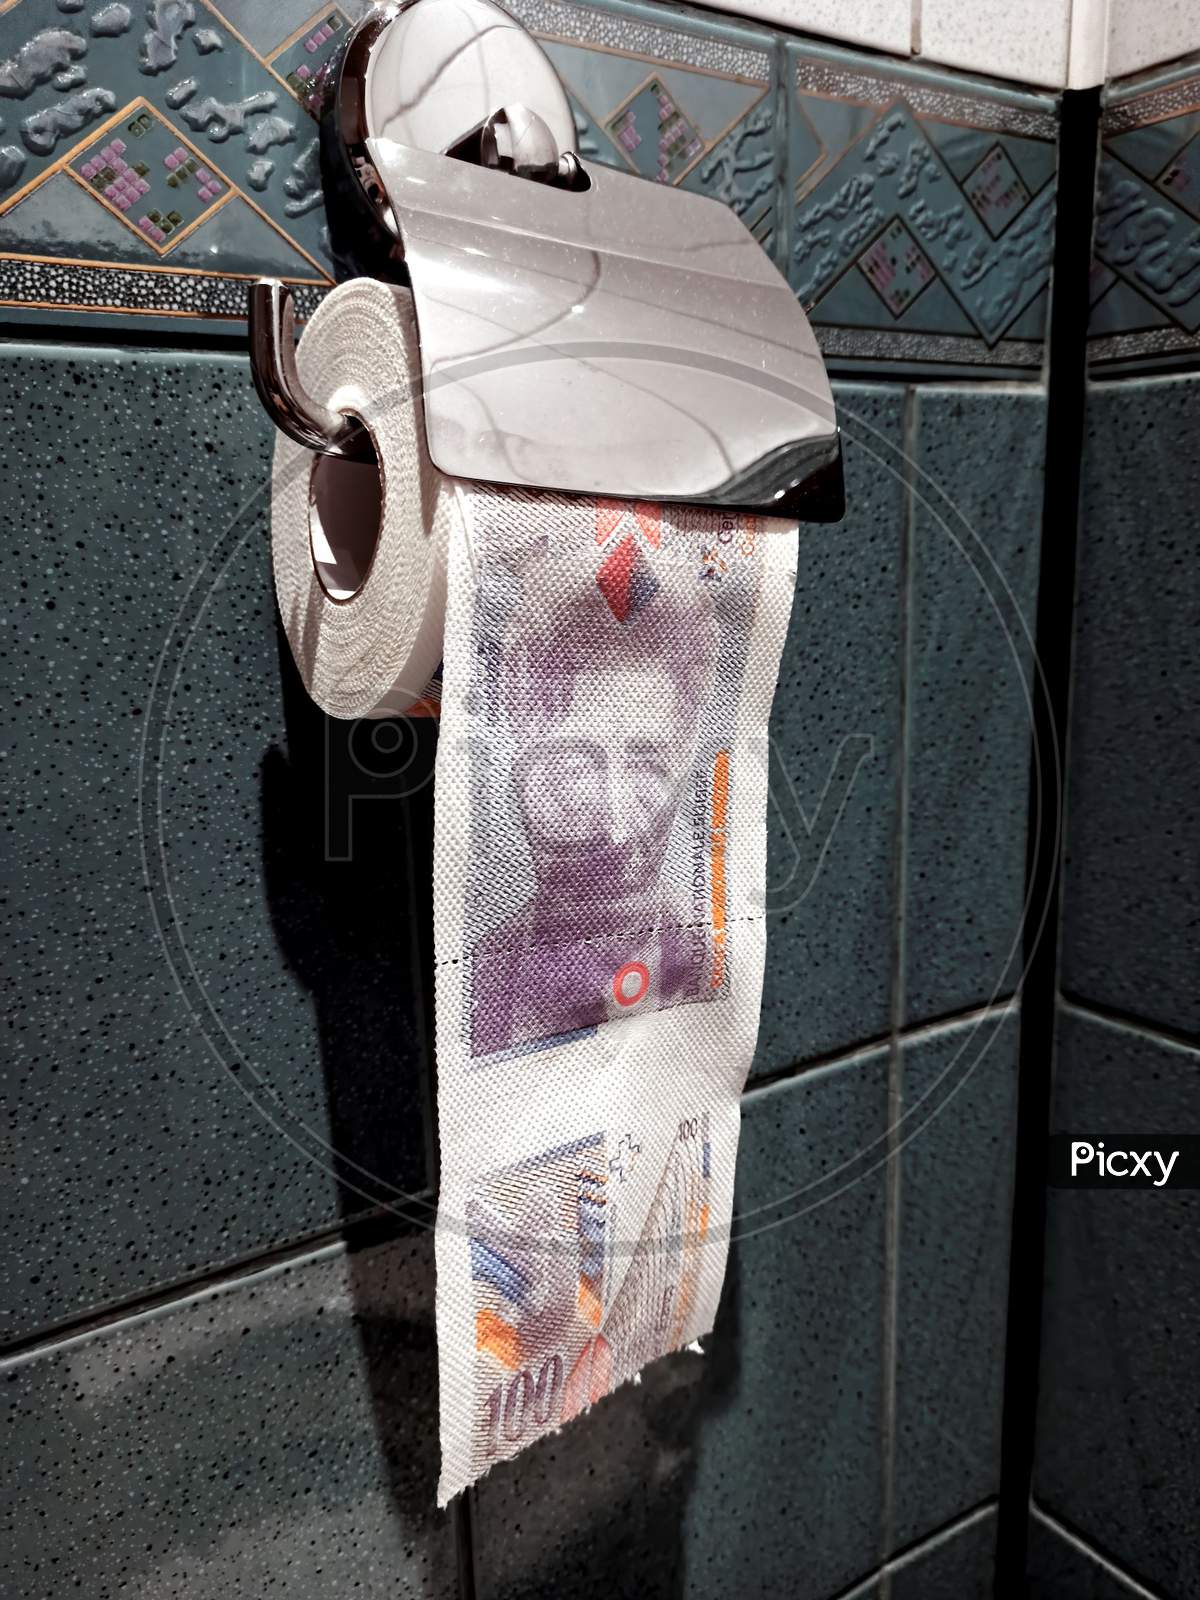 A toilet paper with a currency note imprinted on it, represents it's high demand and low supply during covid 19 pandemic